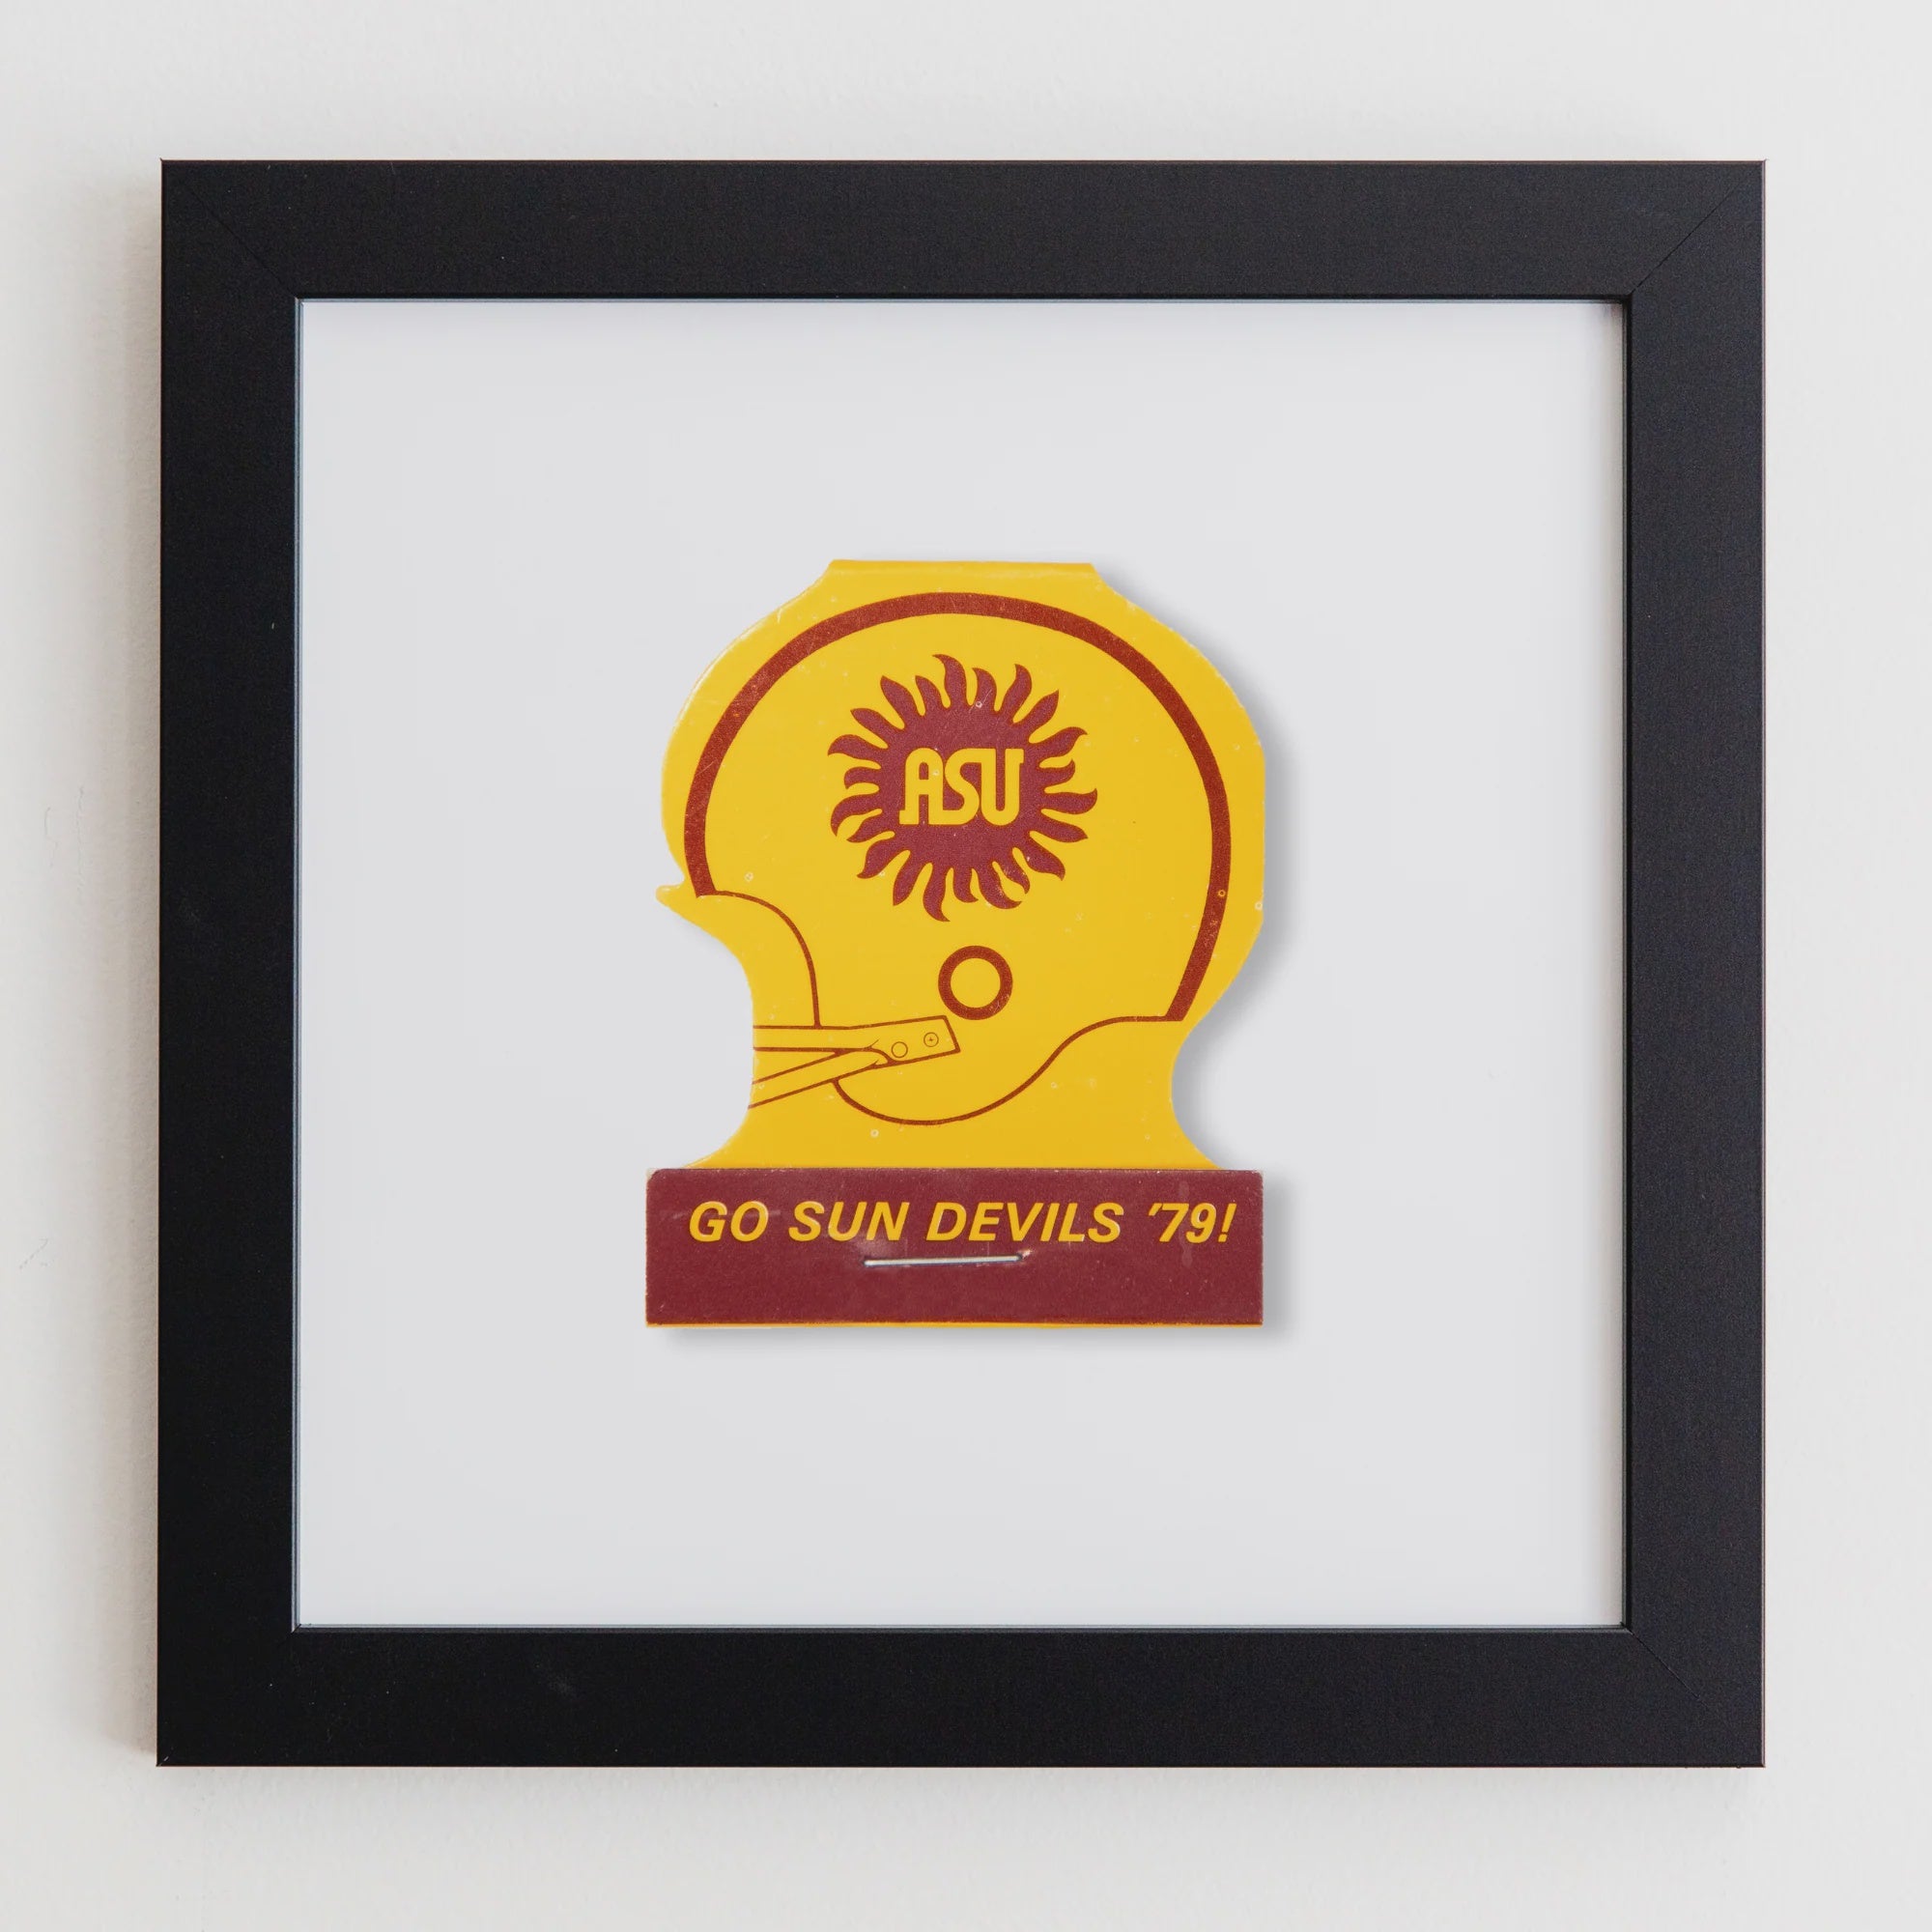 A framed acrylic image featuring a vibrant yellow and orange sunburst design inside a silhouette of a helmet, with the text "GO SUN DEVILS 79!" on a beige background in the Art Square Black Frame by Match South.